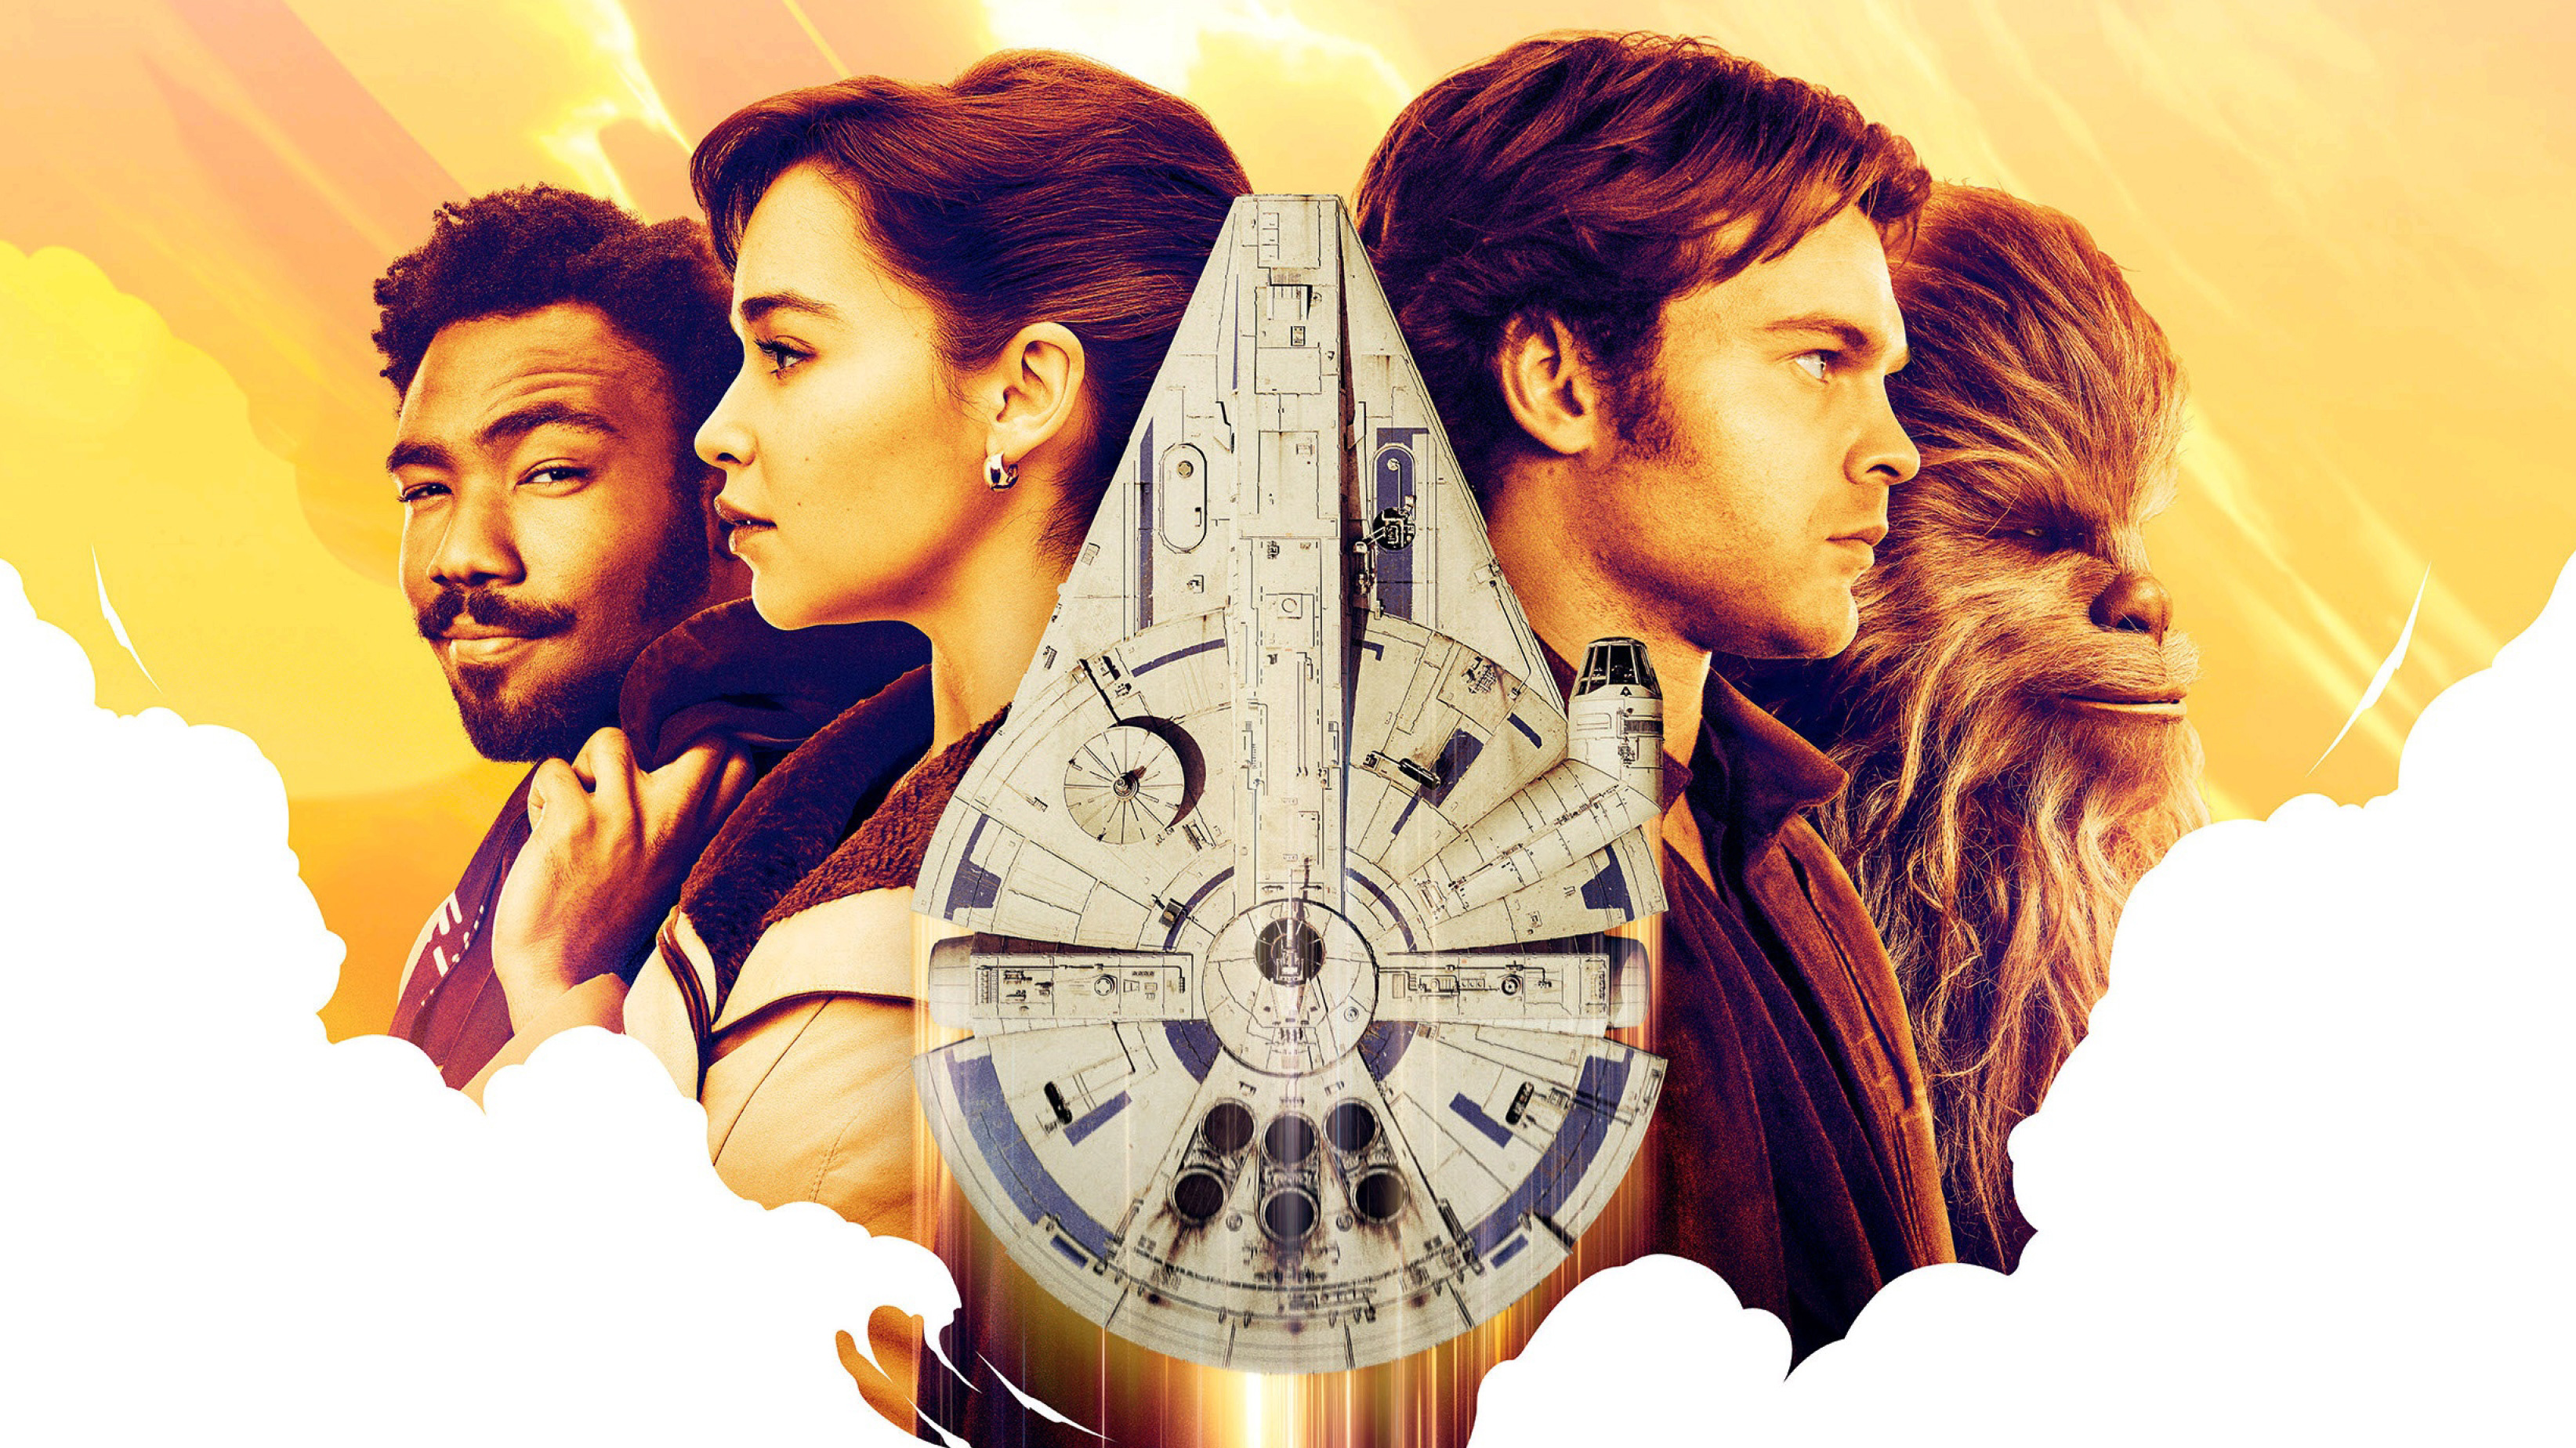 solo-a-star-wars-story-4k-poster-sd.jpg